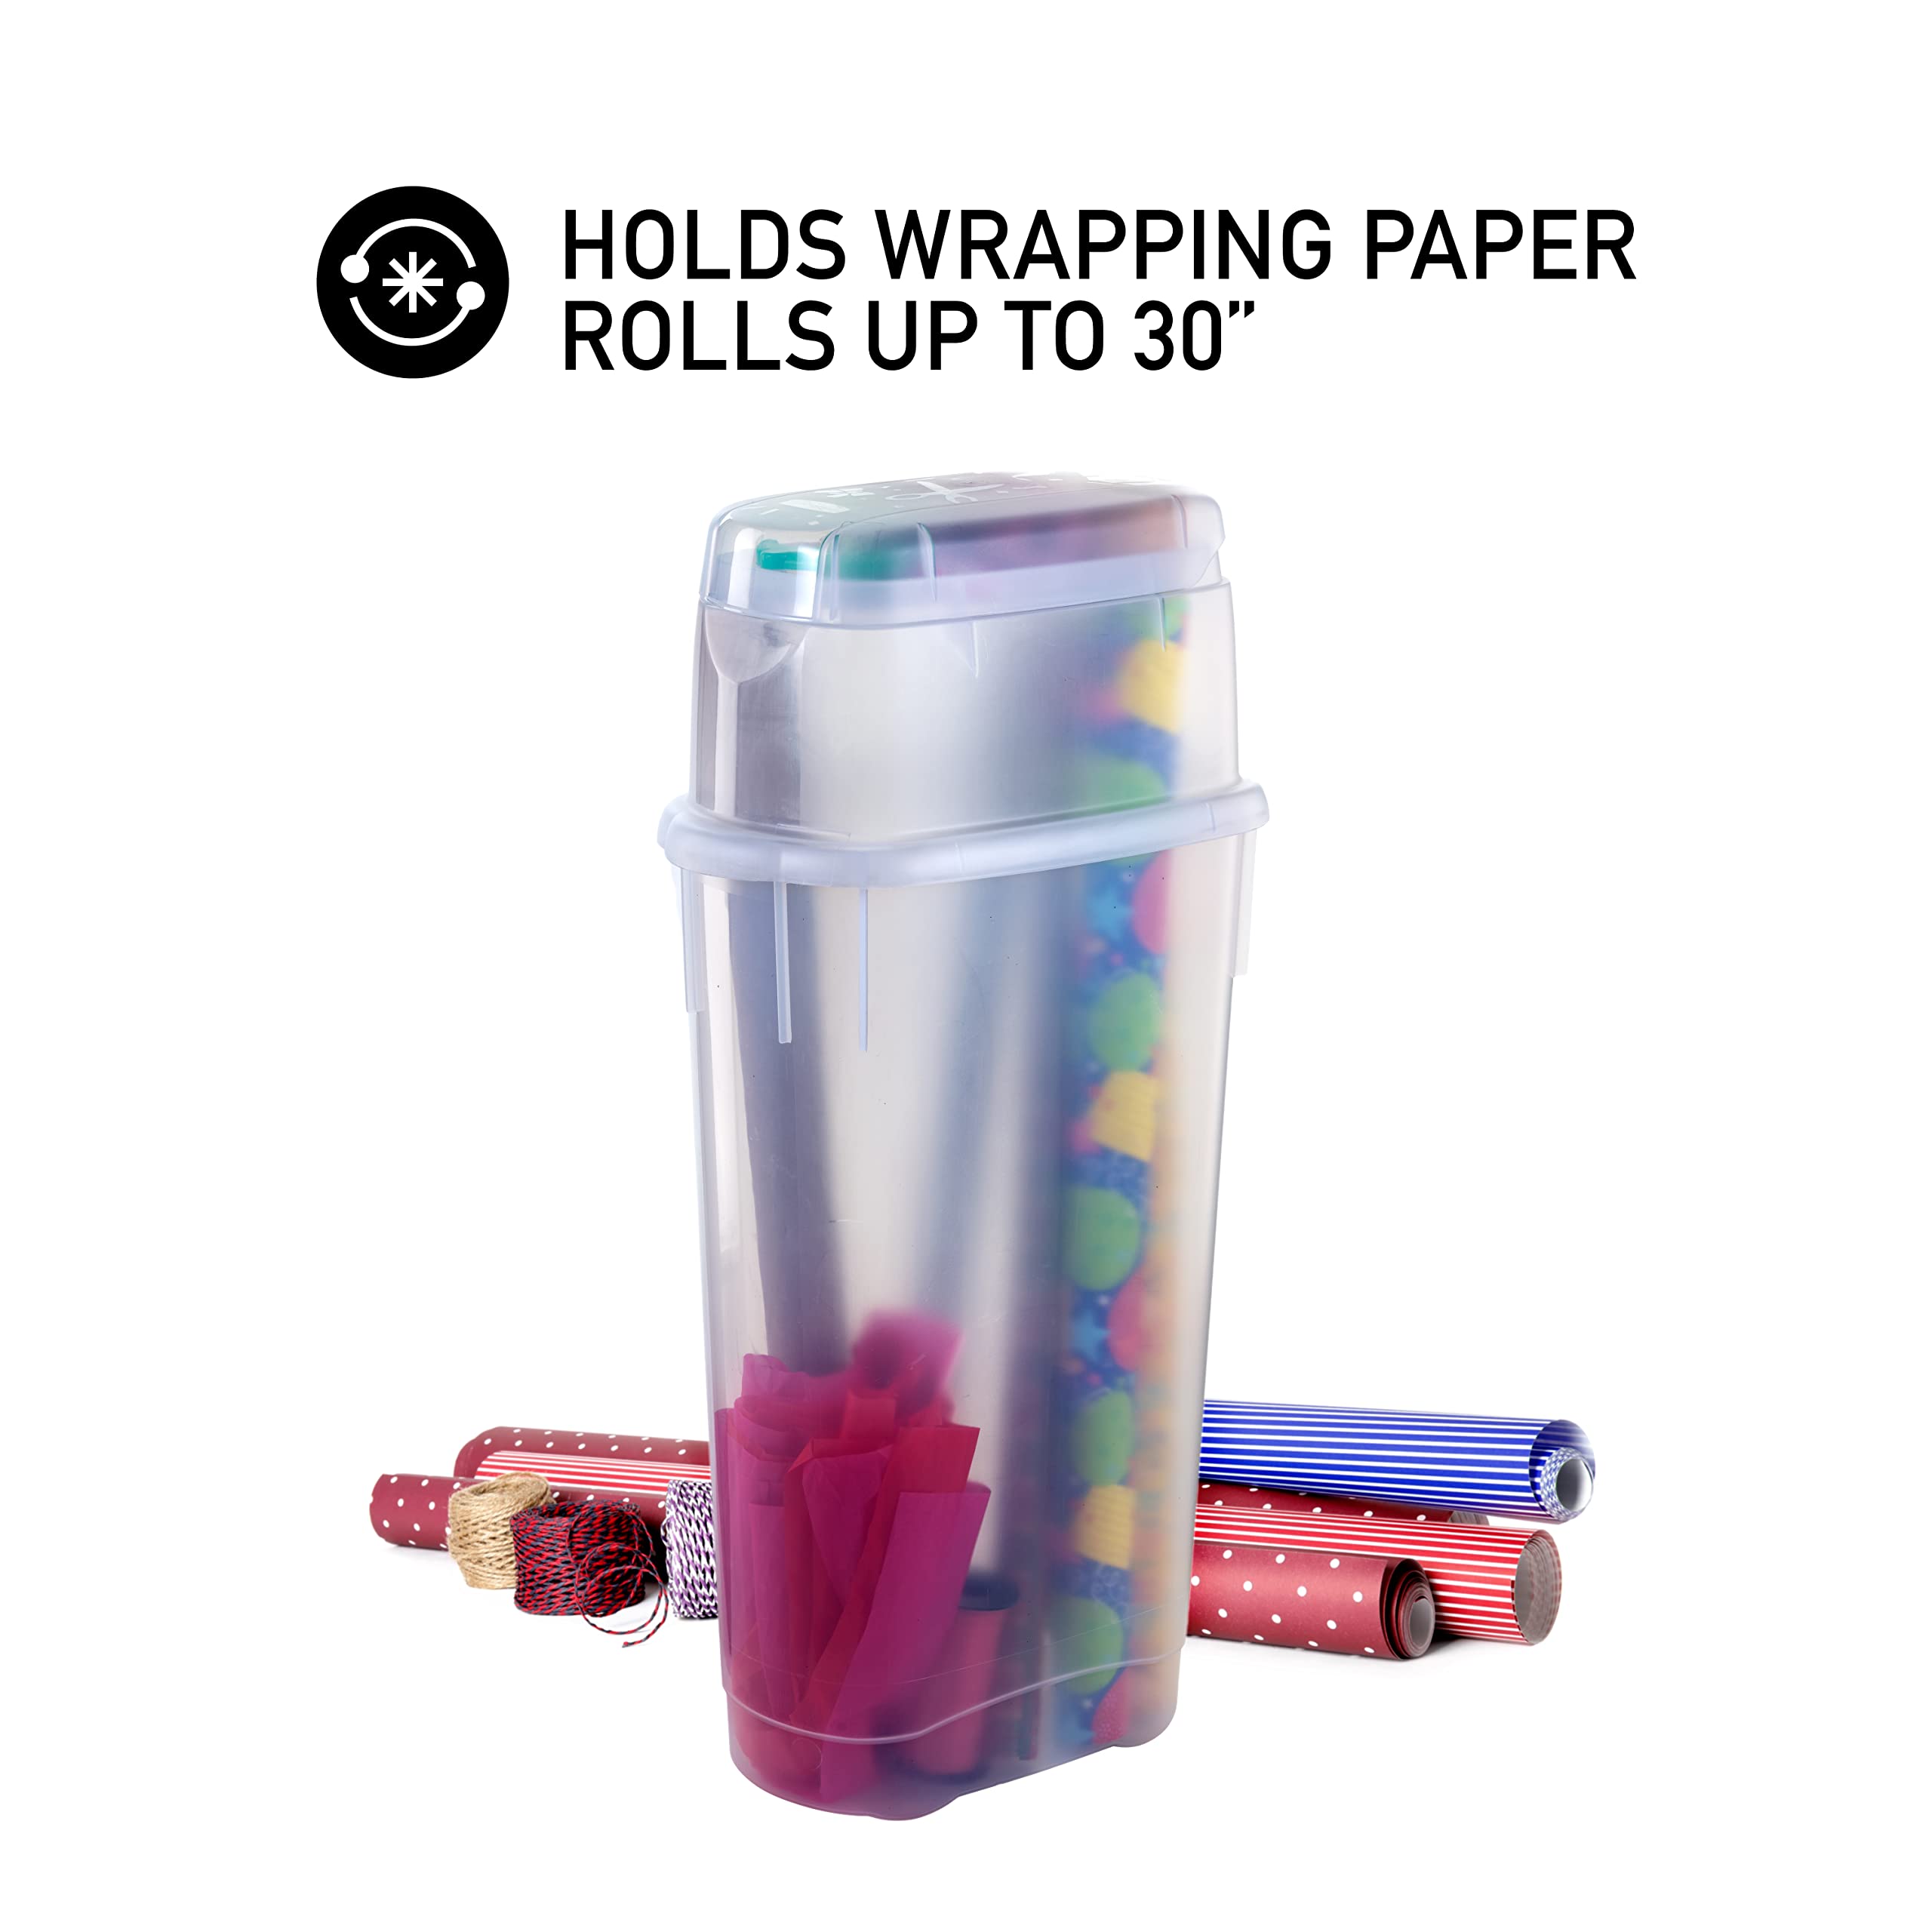 Rubbermaid Wrap N’ Craft, Plastic Storage Container for Wrapping Paper and Crafting Supplies, Fits Up to 20 Rolls of Standard 30” Wrapping Paper, Two Compartments, Slim Design, Clear Exterior